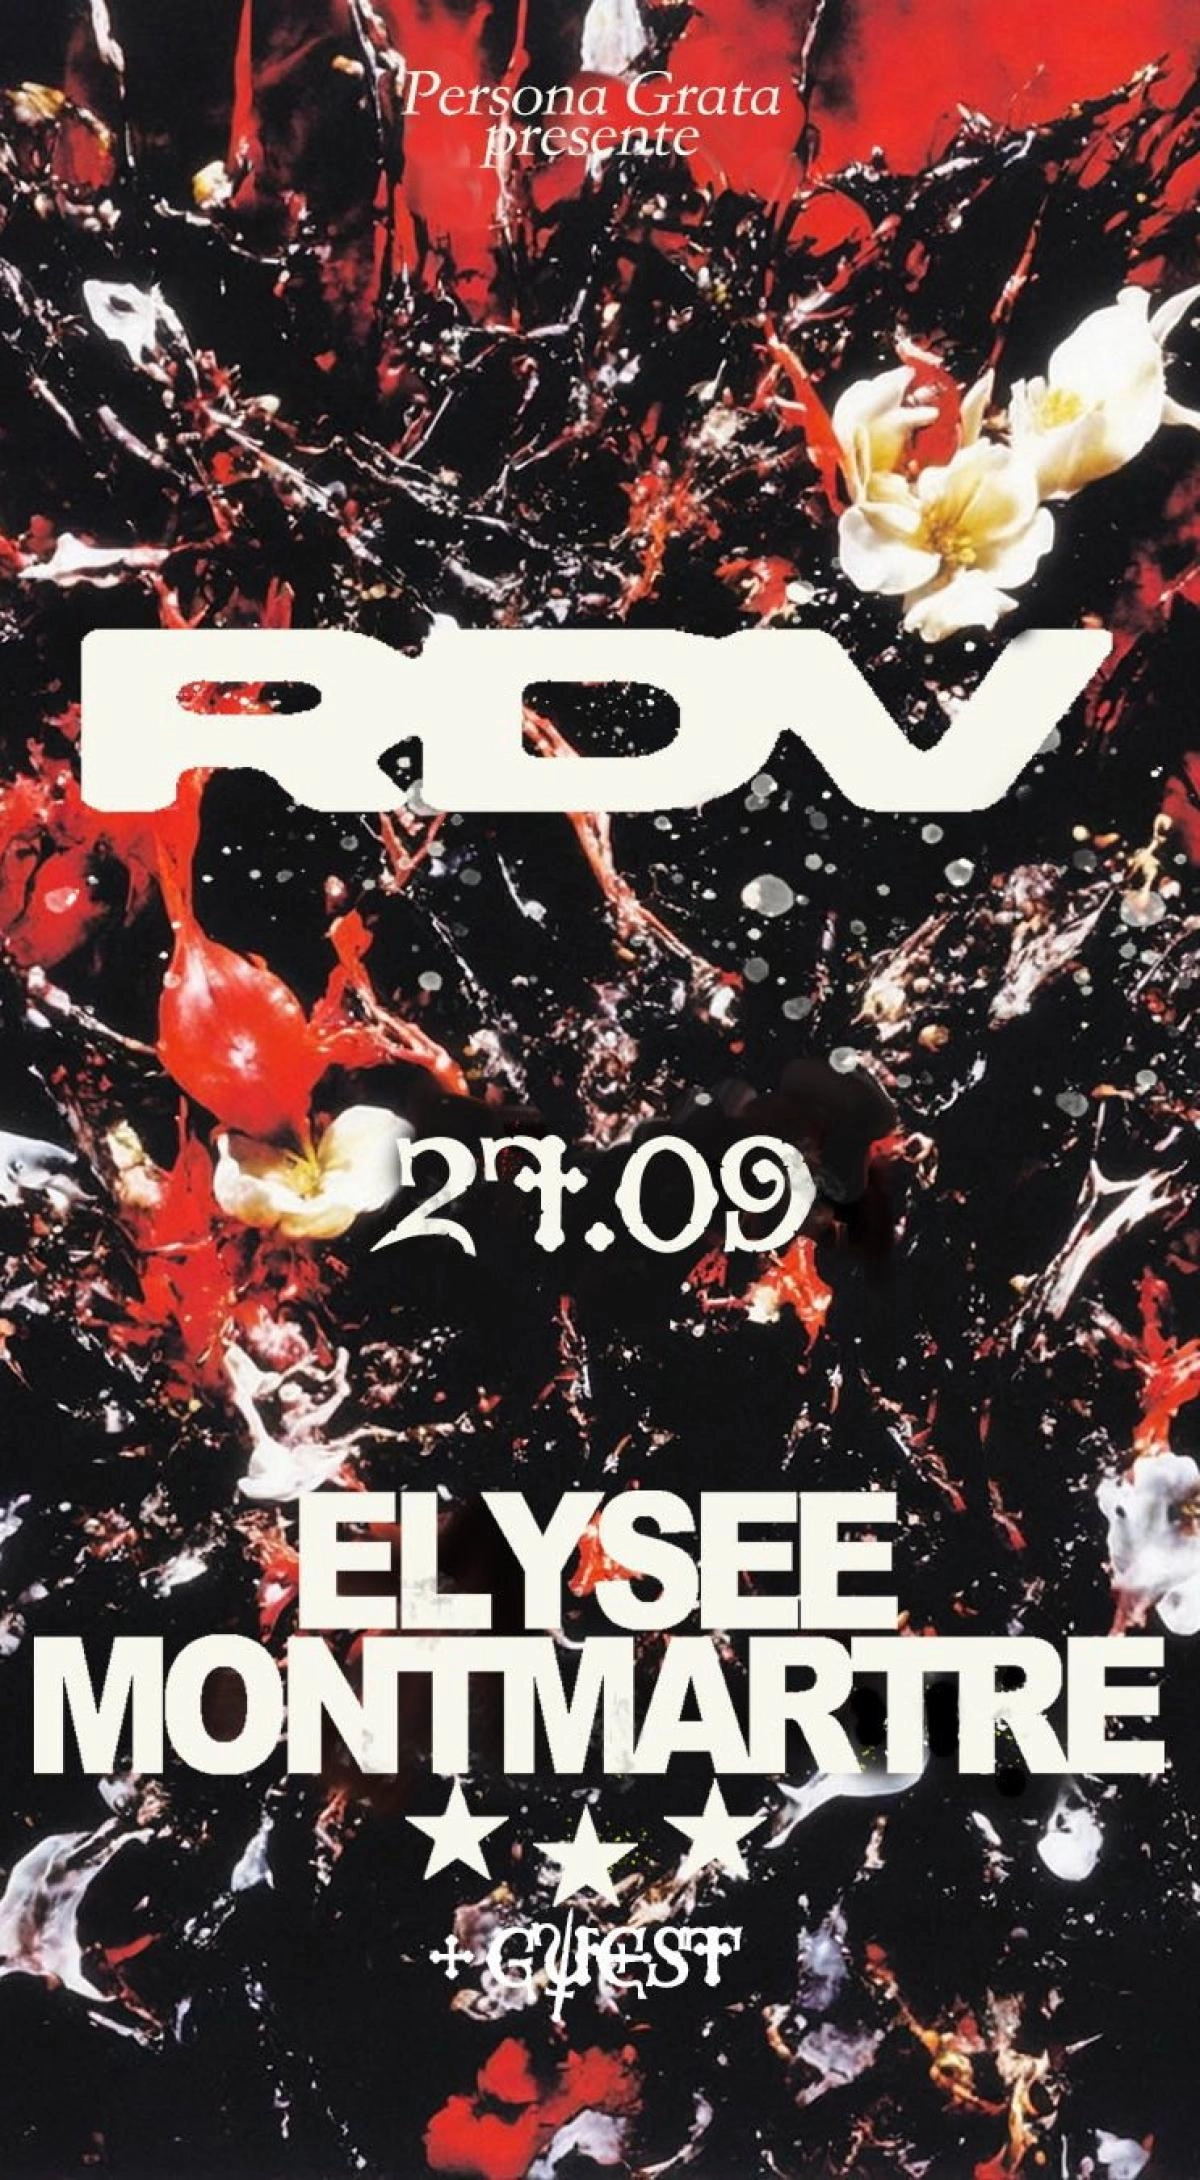 Rendez-Vous at Elysee Montmartre Tickets